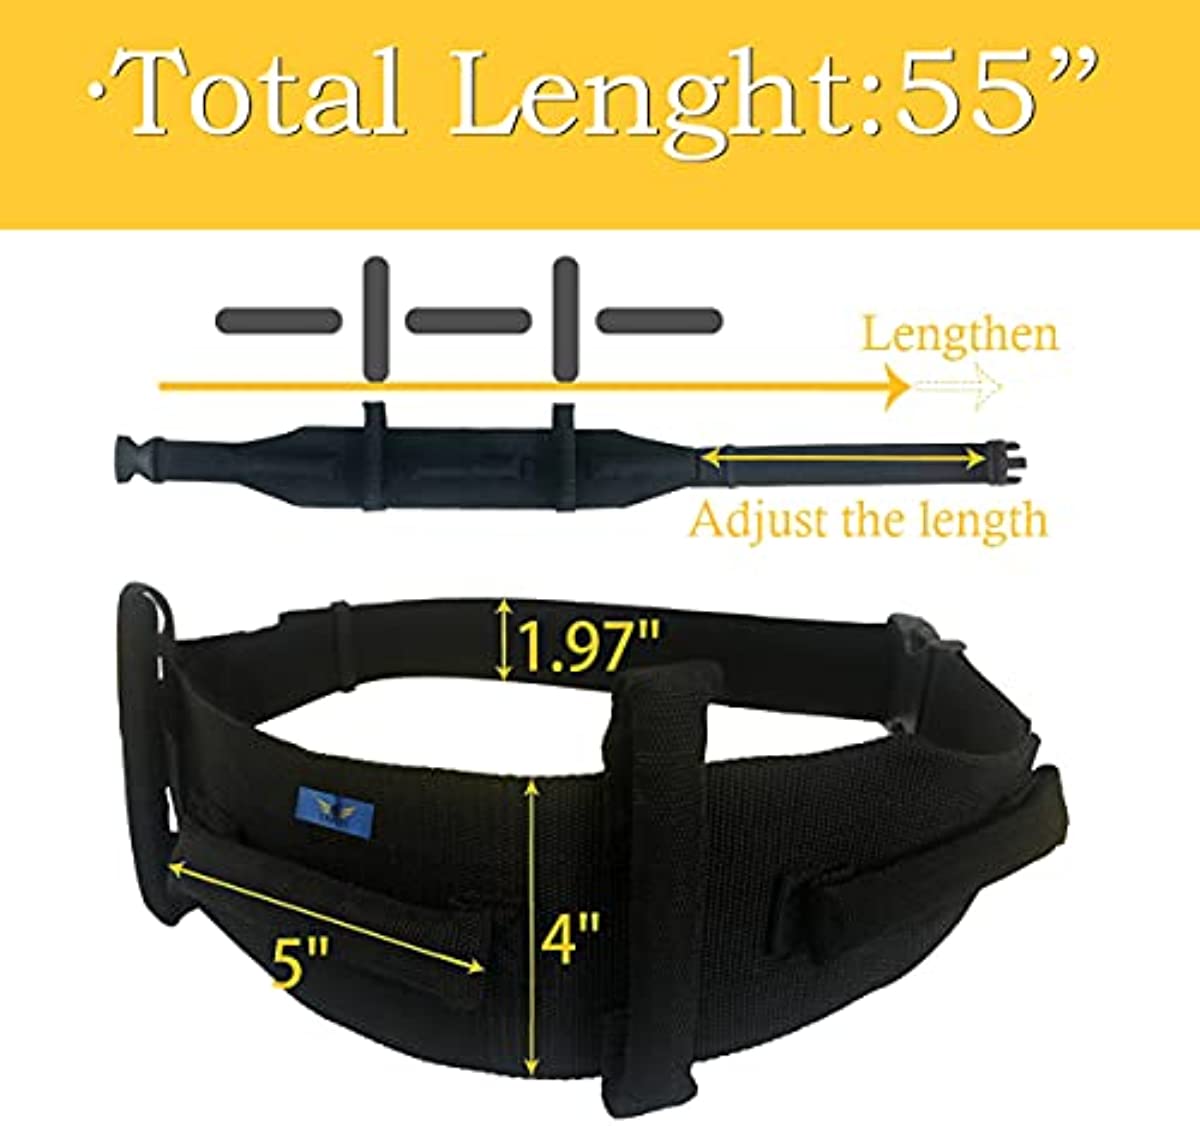 TripWing Transfer Gait Belt with Handles and Quick Release Buckle - Elderly Patient Walking Ambulation Assist Mobility Aid (55\" L x 4\" W, Solid Handle)